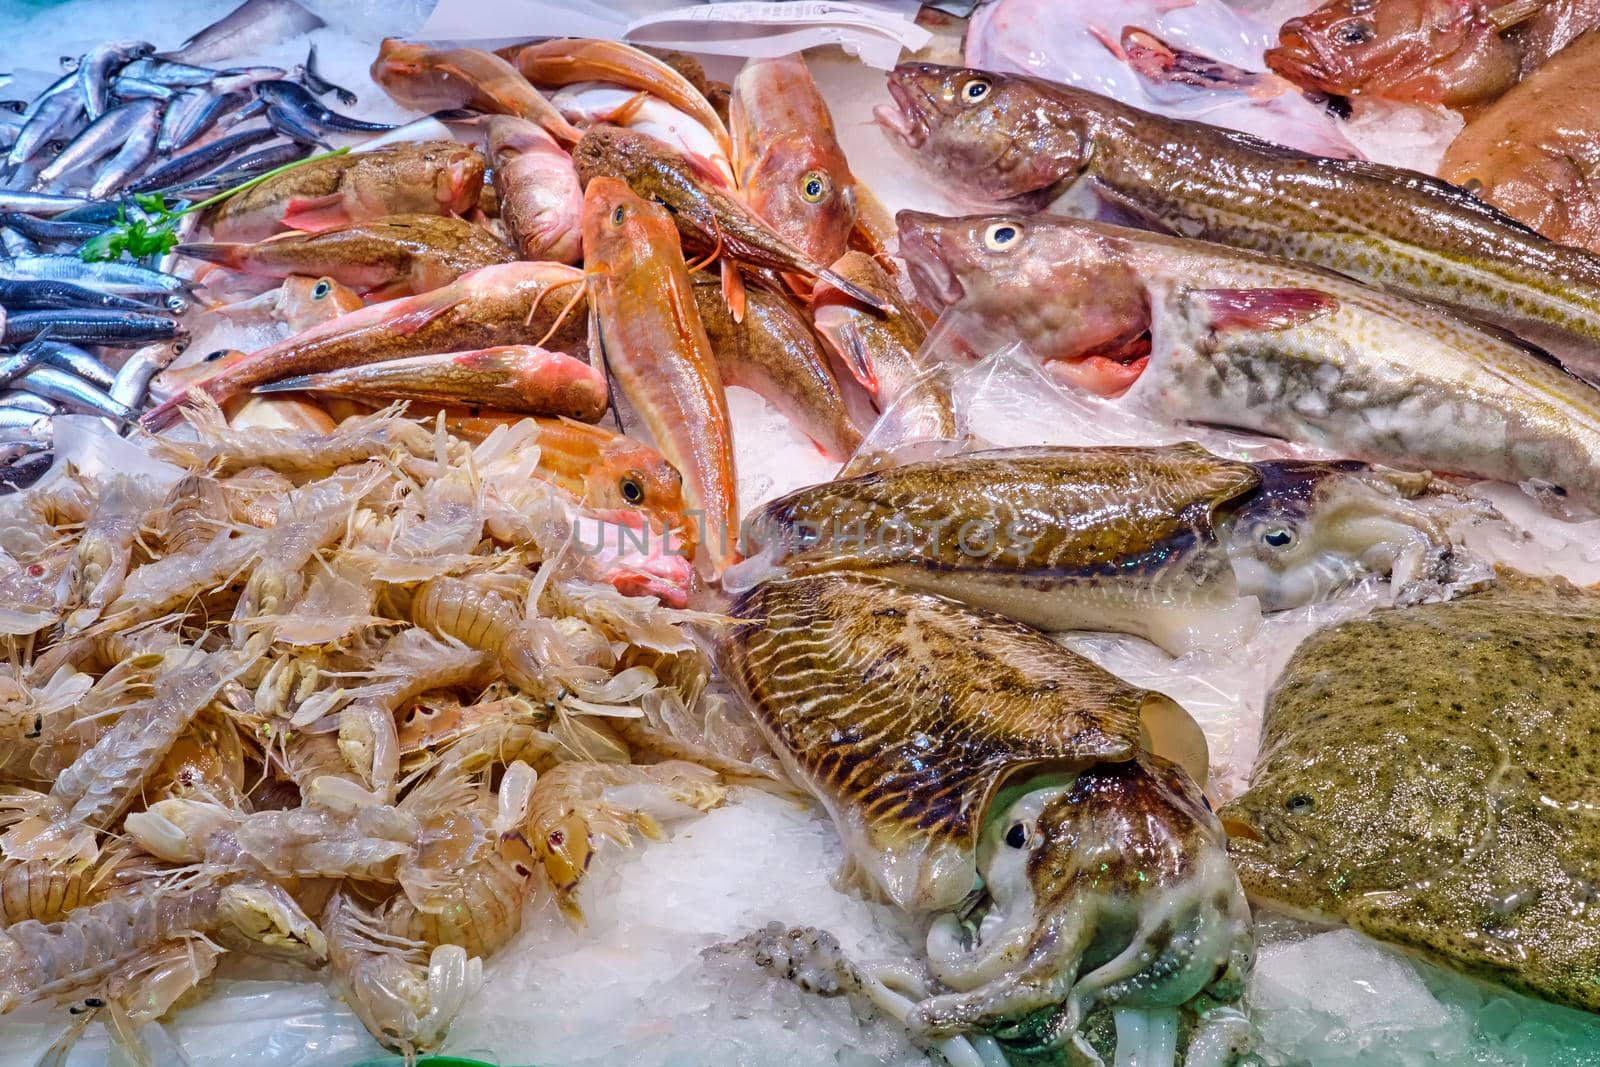 Fresh fish and seafood for sale seen at a market in Barcelona, Spain